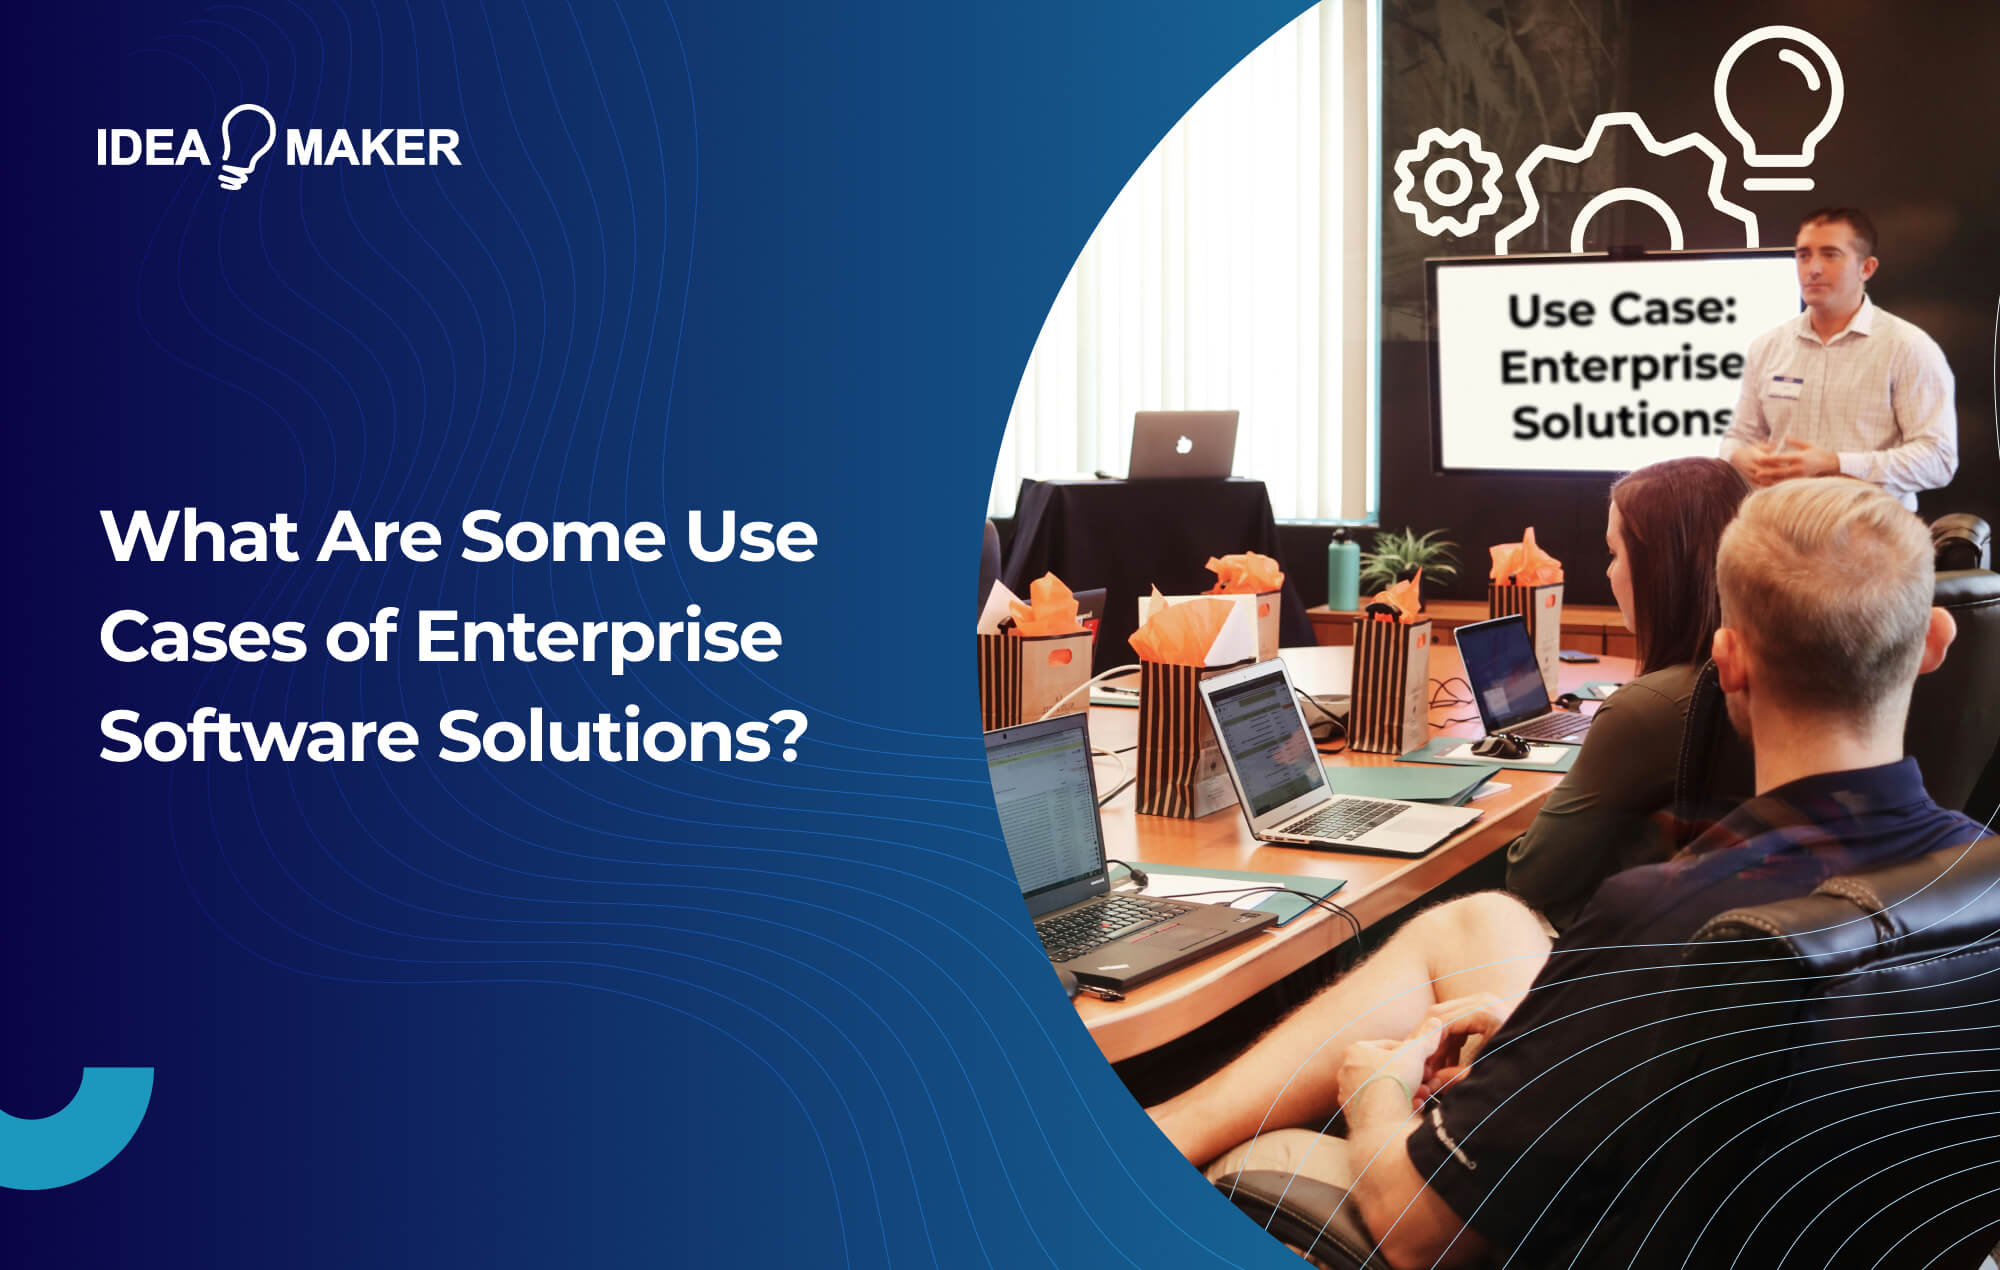 Ideamaker - What Are Some Use Cases of Enterprise Software Solutions_